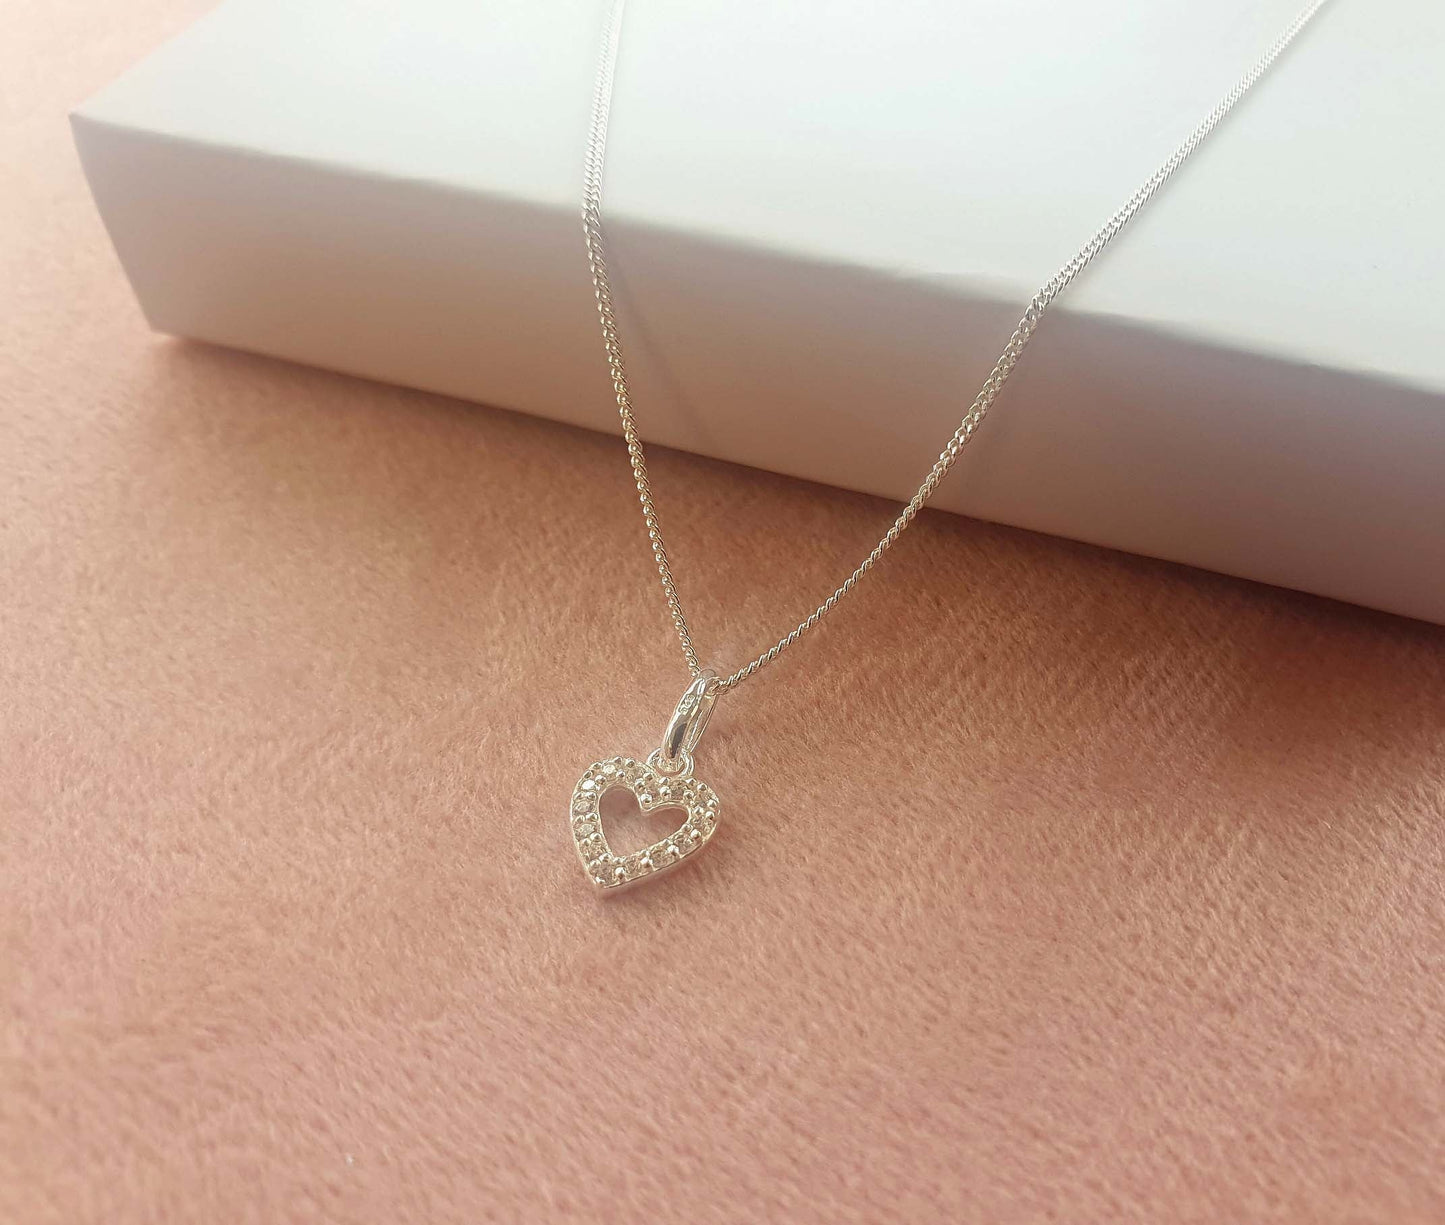 Sister Heart Necklace with Cubic Zirconia in Sterling Silver 925, Personalised Gift